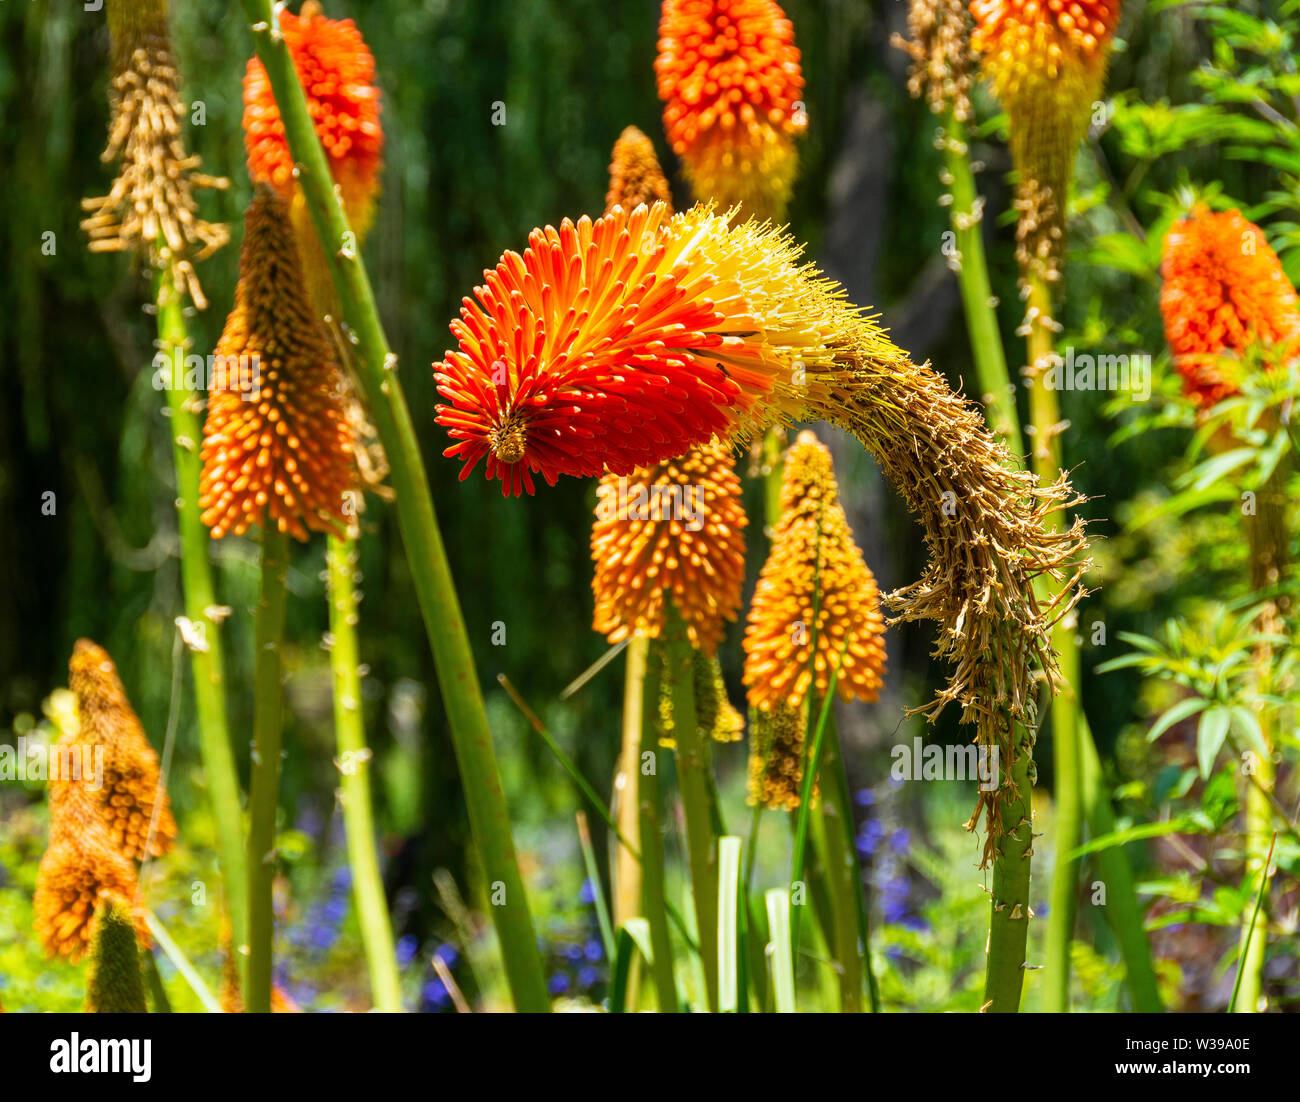 Closeup of spiky Red Hot Poker Flowers, Kniphofia, ‘Royal Standard’ growing in a botanical garden flowerbed. Stock Photo